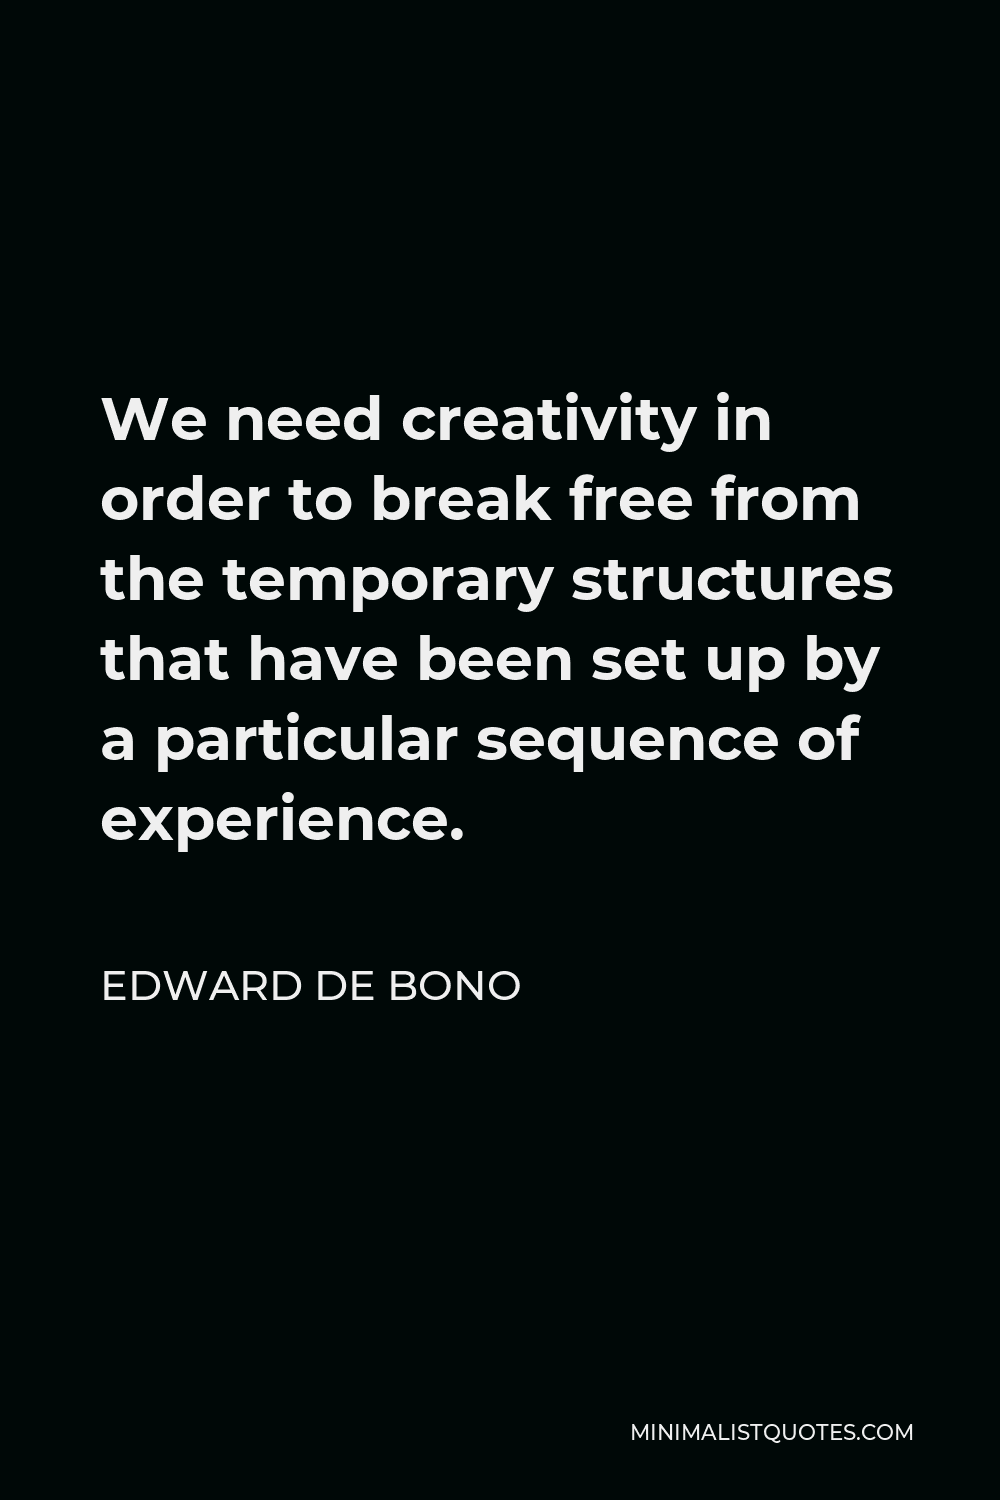 Edward de Bono Quote - We need creativity in order to break free from the temporary structures that have been set up by a particular sequence of experience.